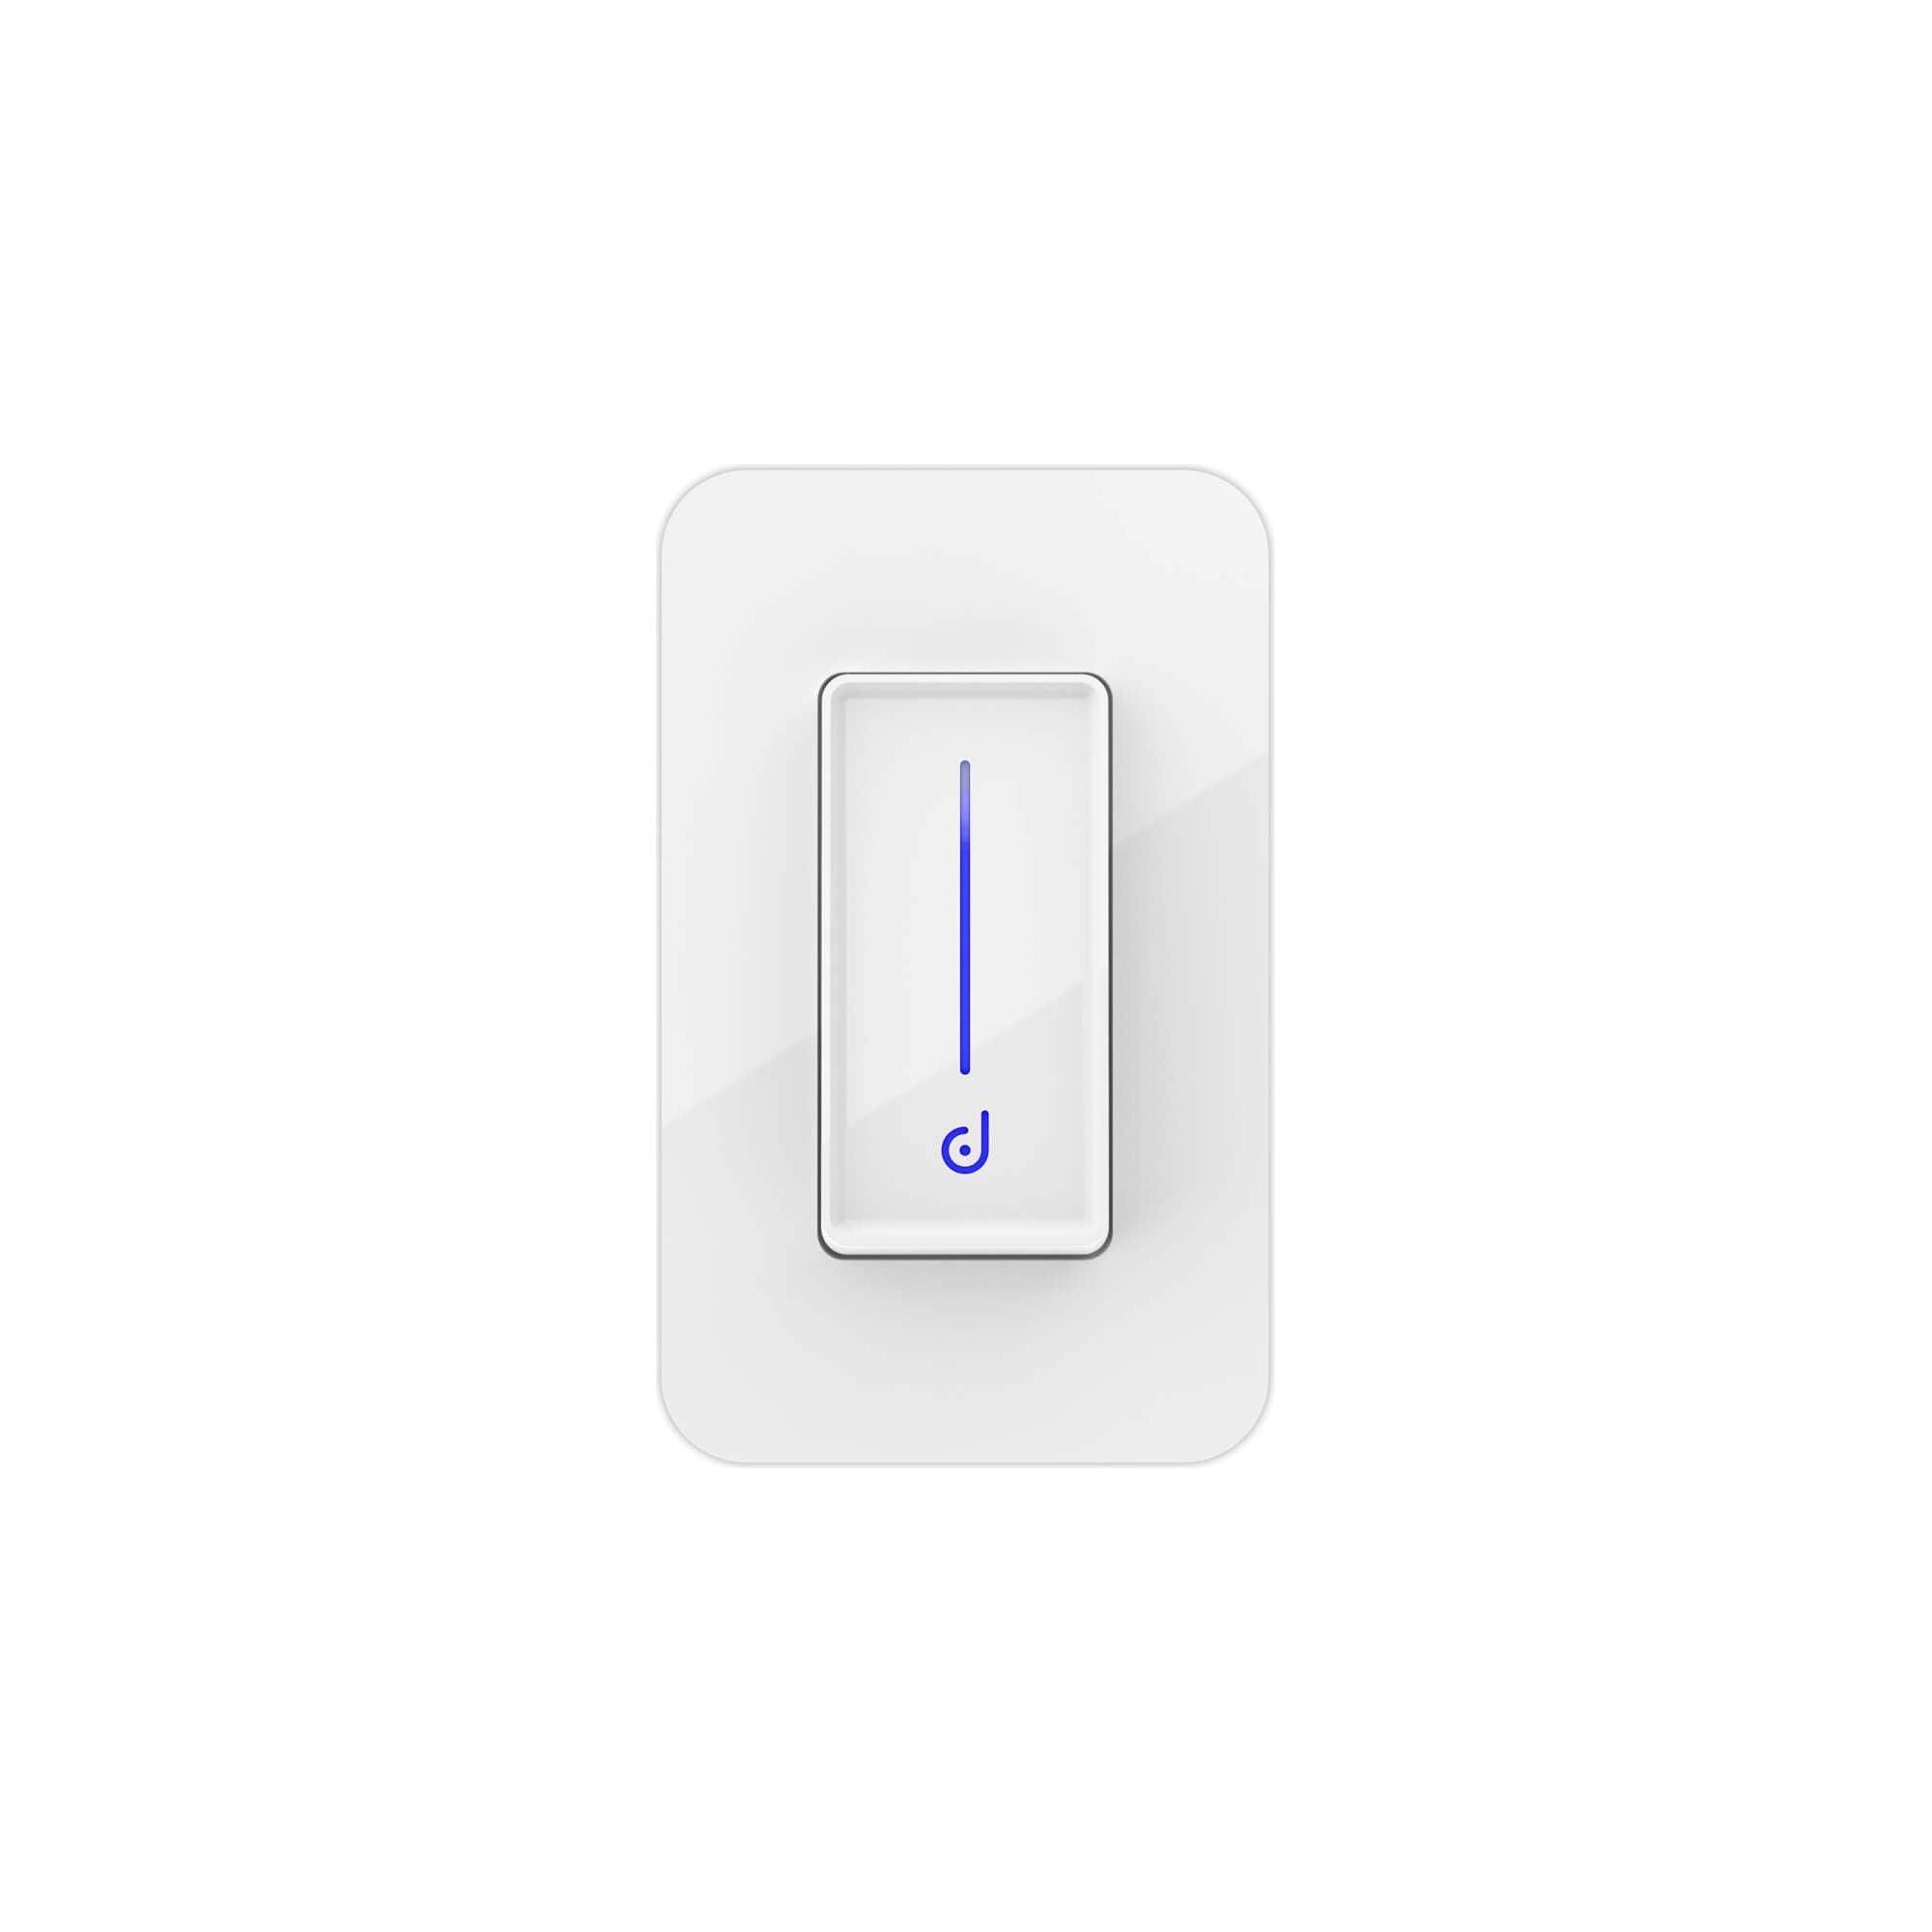 DALS - Smart Dimmer Switch - Lights Canada